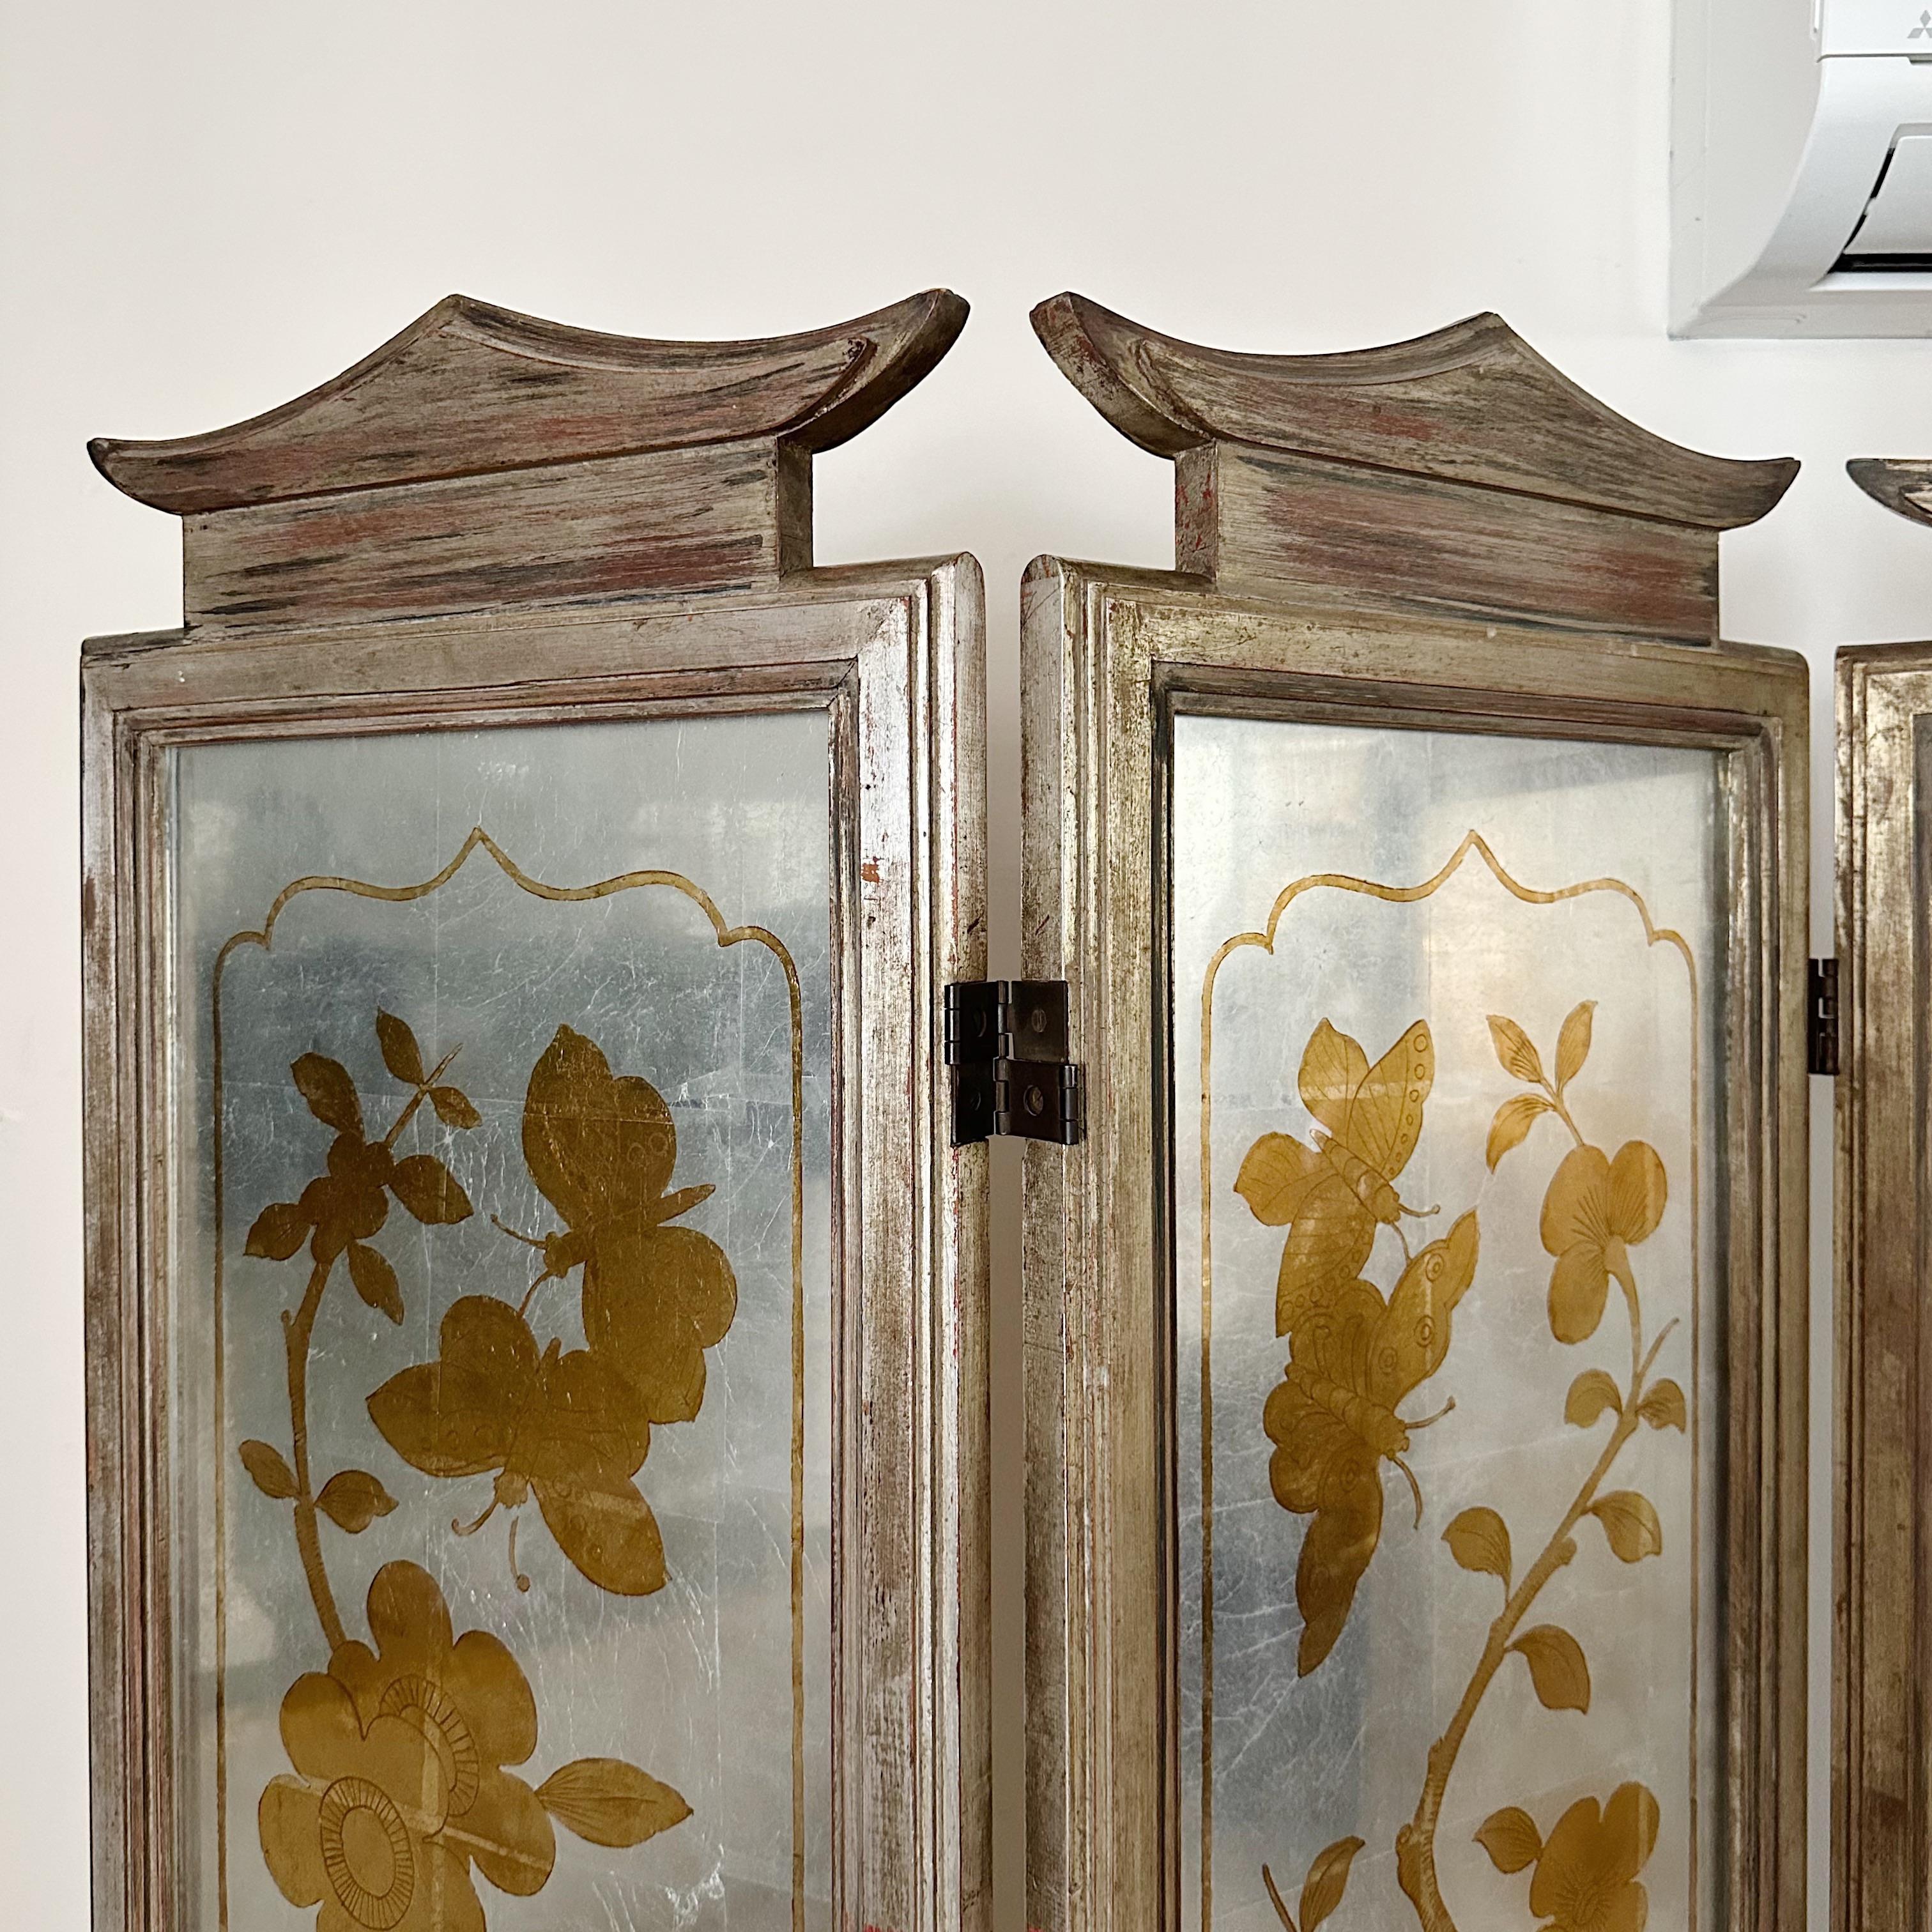 This magnificent James Mont screen room divider , created in 1950, is a stunning example of Mont's Chinese-modern style. Each of the glass panels is hand-finished with a verre eglomise design in gold metal leaf, backed with a silver metal leaf. The